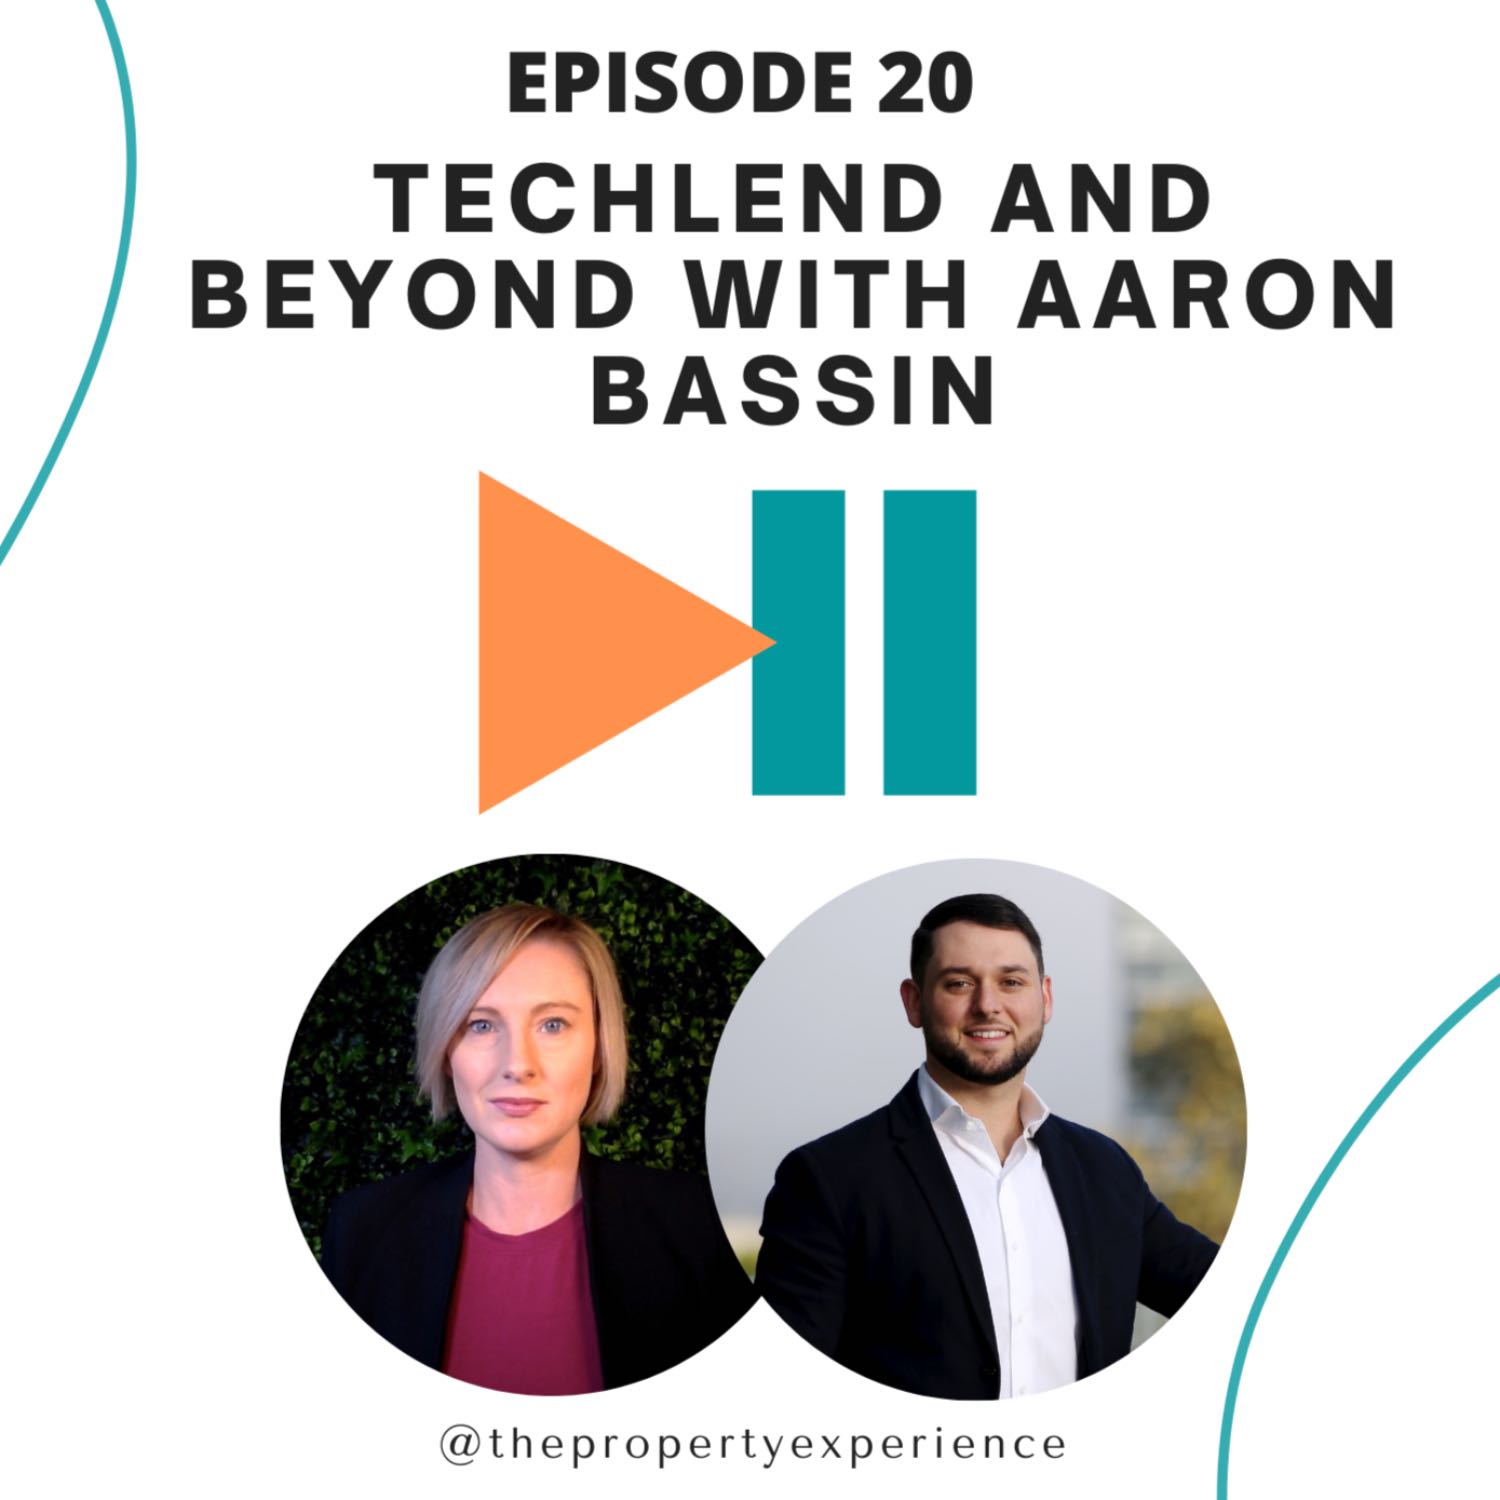 TechLend and Beyond with Aaron Bassin - The Property Experience Podcast